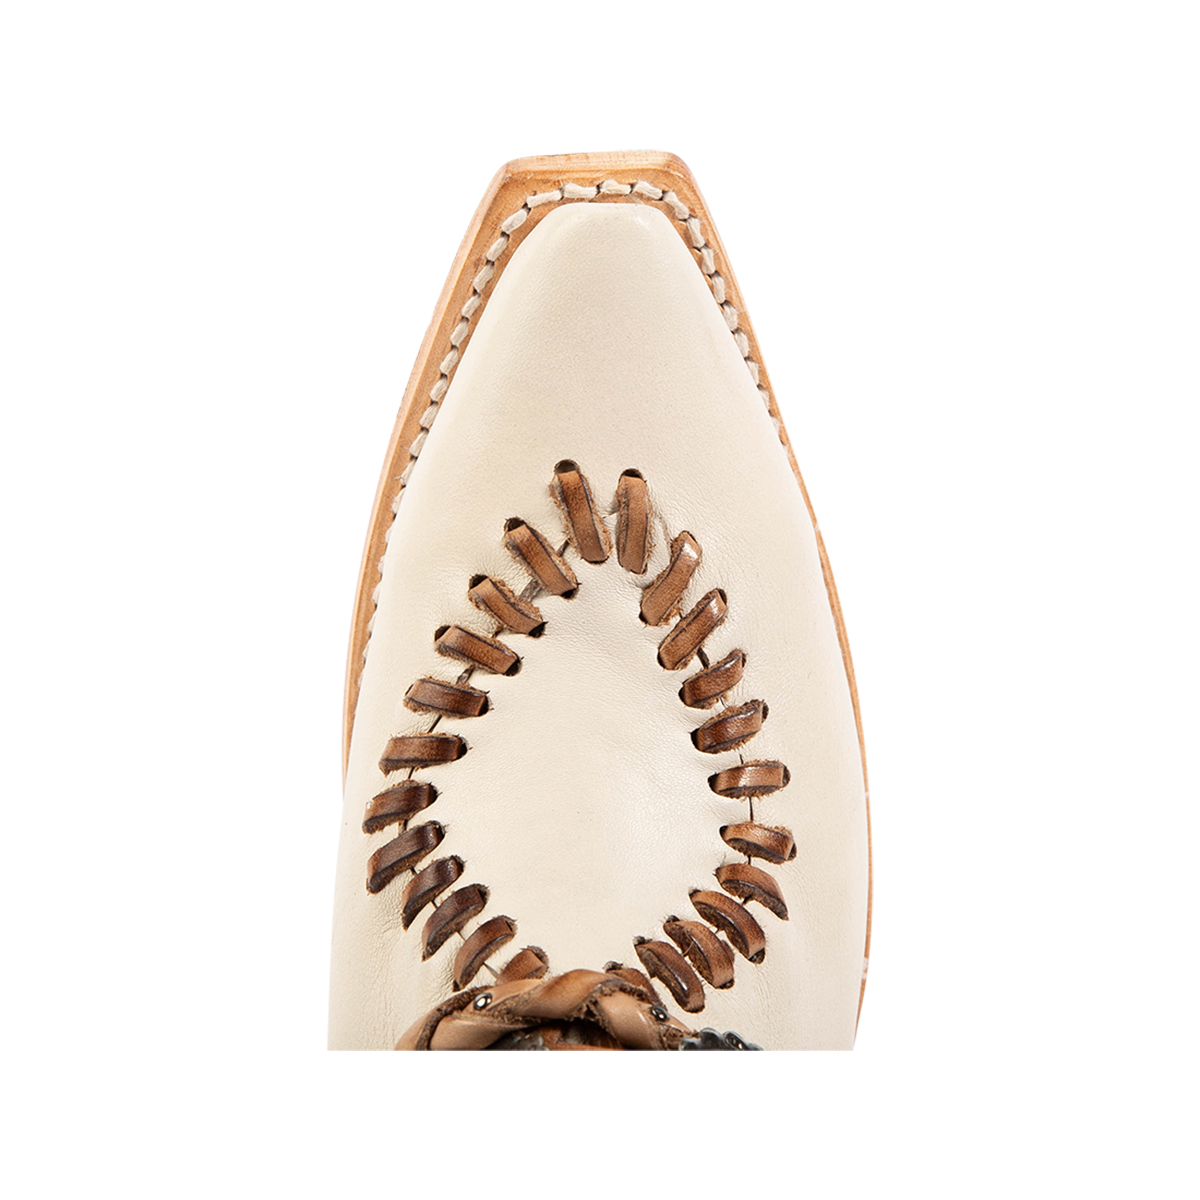 Top view showing whip stitch detailing and snip toe construction on FREEBIRD women's Whimsical off white leather bootie